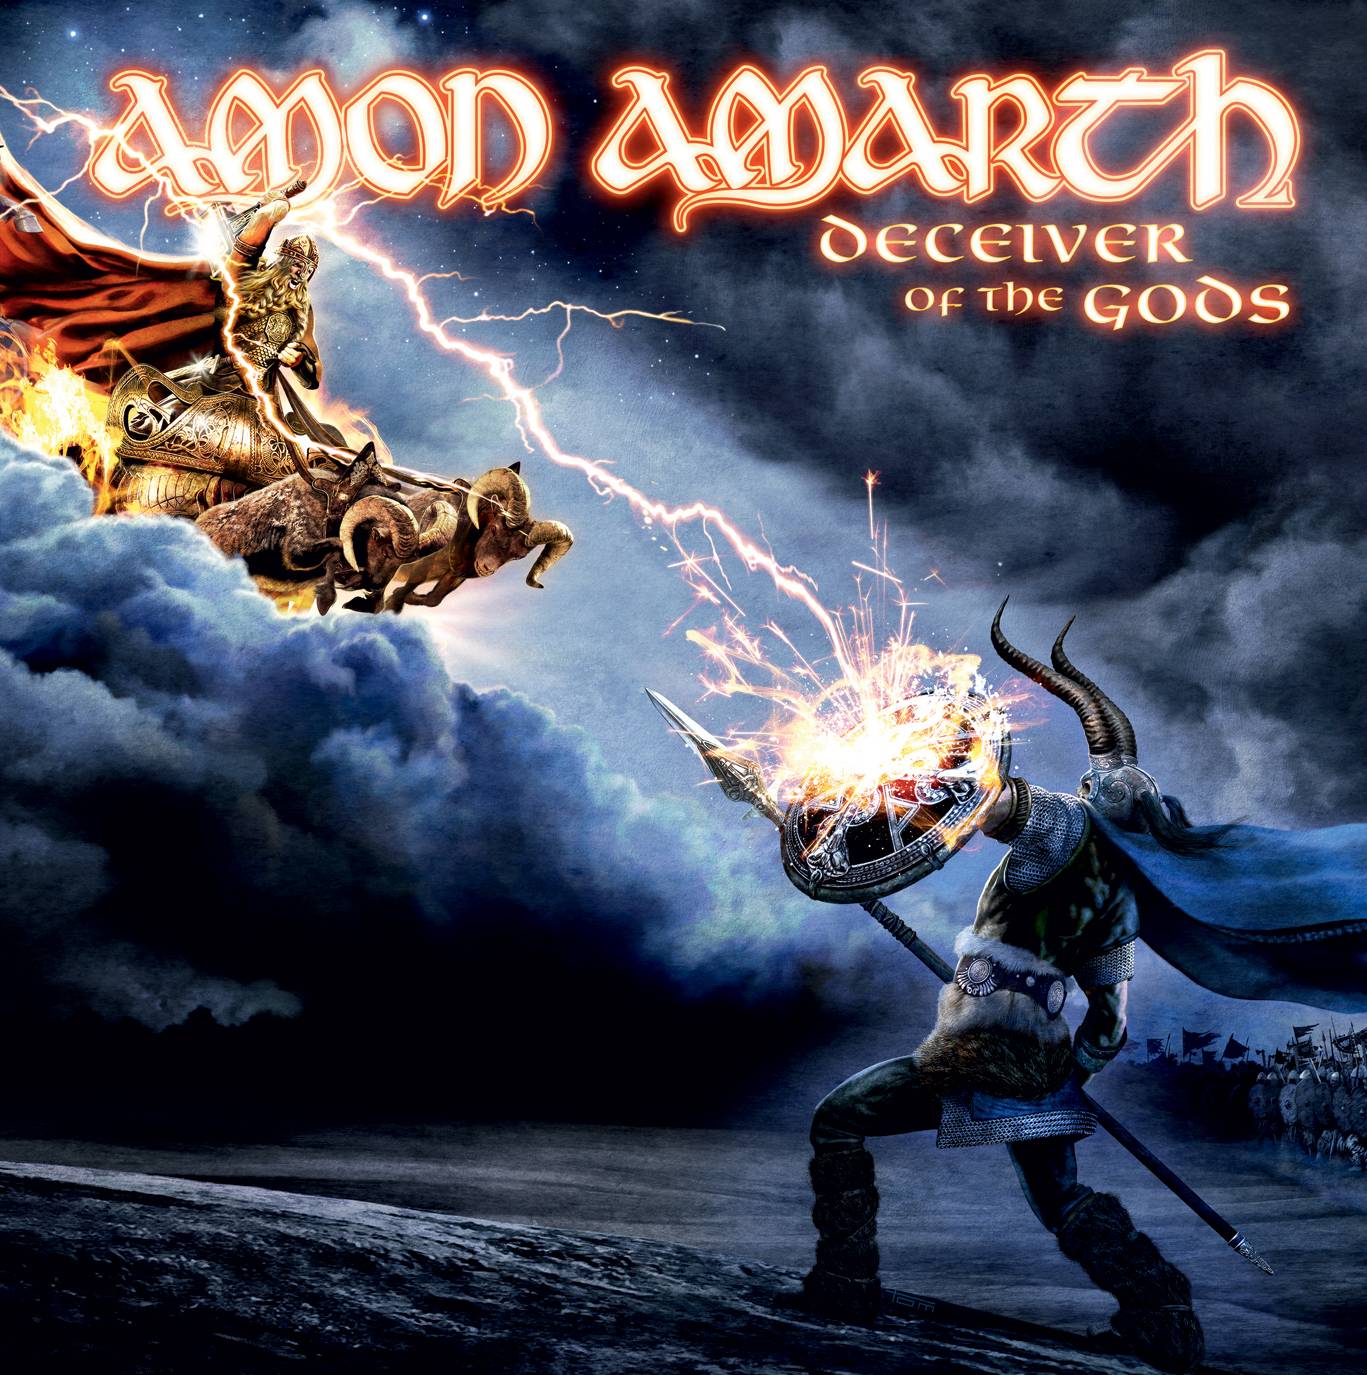 News Added Apr 12, 2013 Amon Amarth is a melodic death metal band from Tumba, Sweden, founded in 1992. It takes its name from the Sindarin name of Mount Doom, a volcano in J. R. R. Tolkien?s Middle-earth. Their new album "Deceiver of the Gods" was announced and the cover revealed through reddit's /r/metal - […]